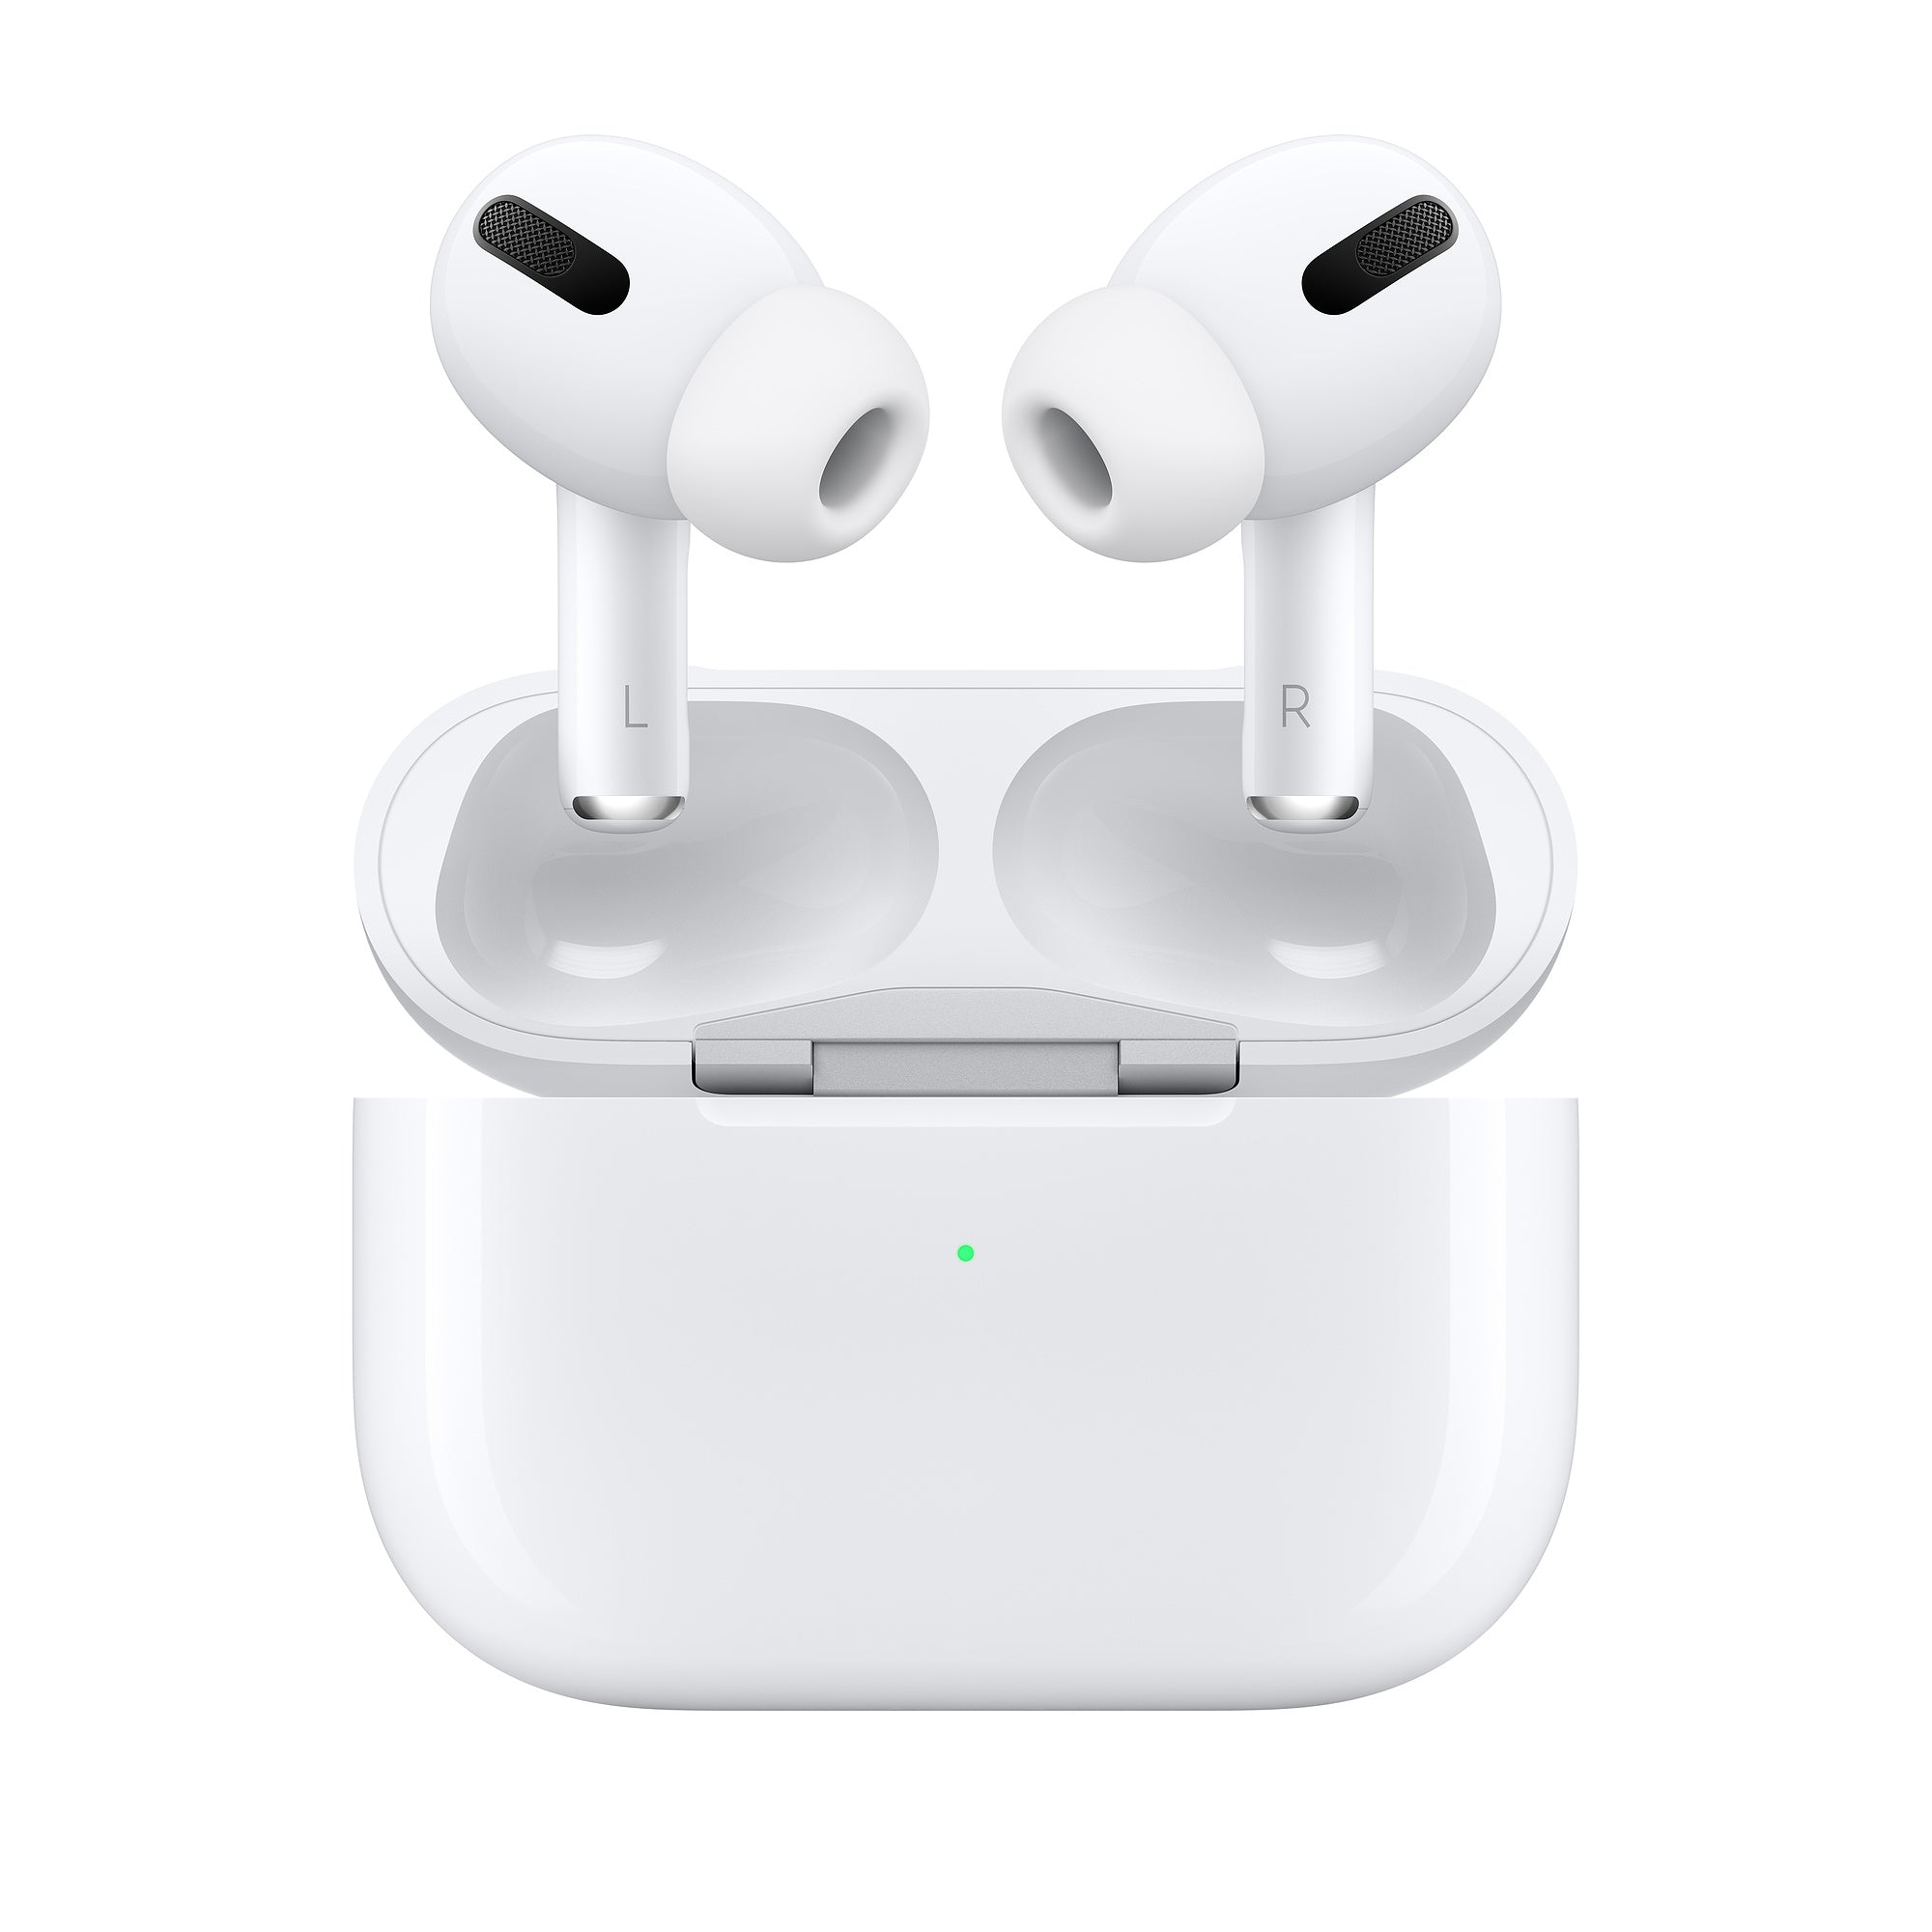 AirPods エアーポッズ R片耳 第３世代 A2065